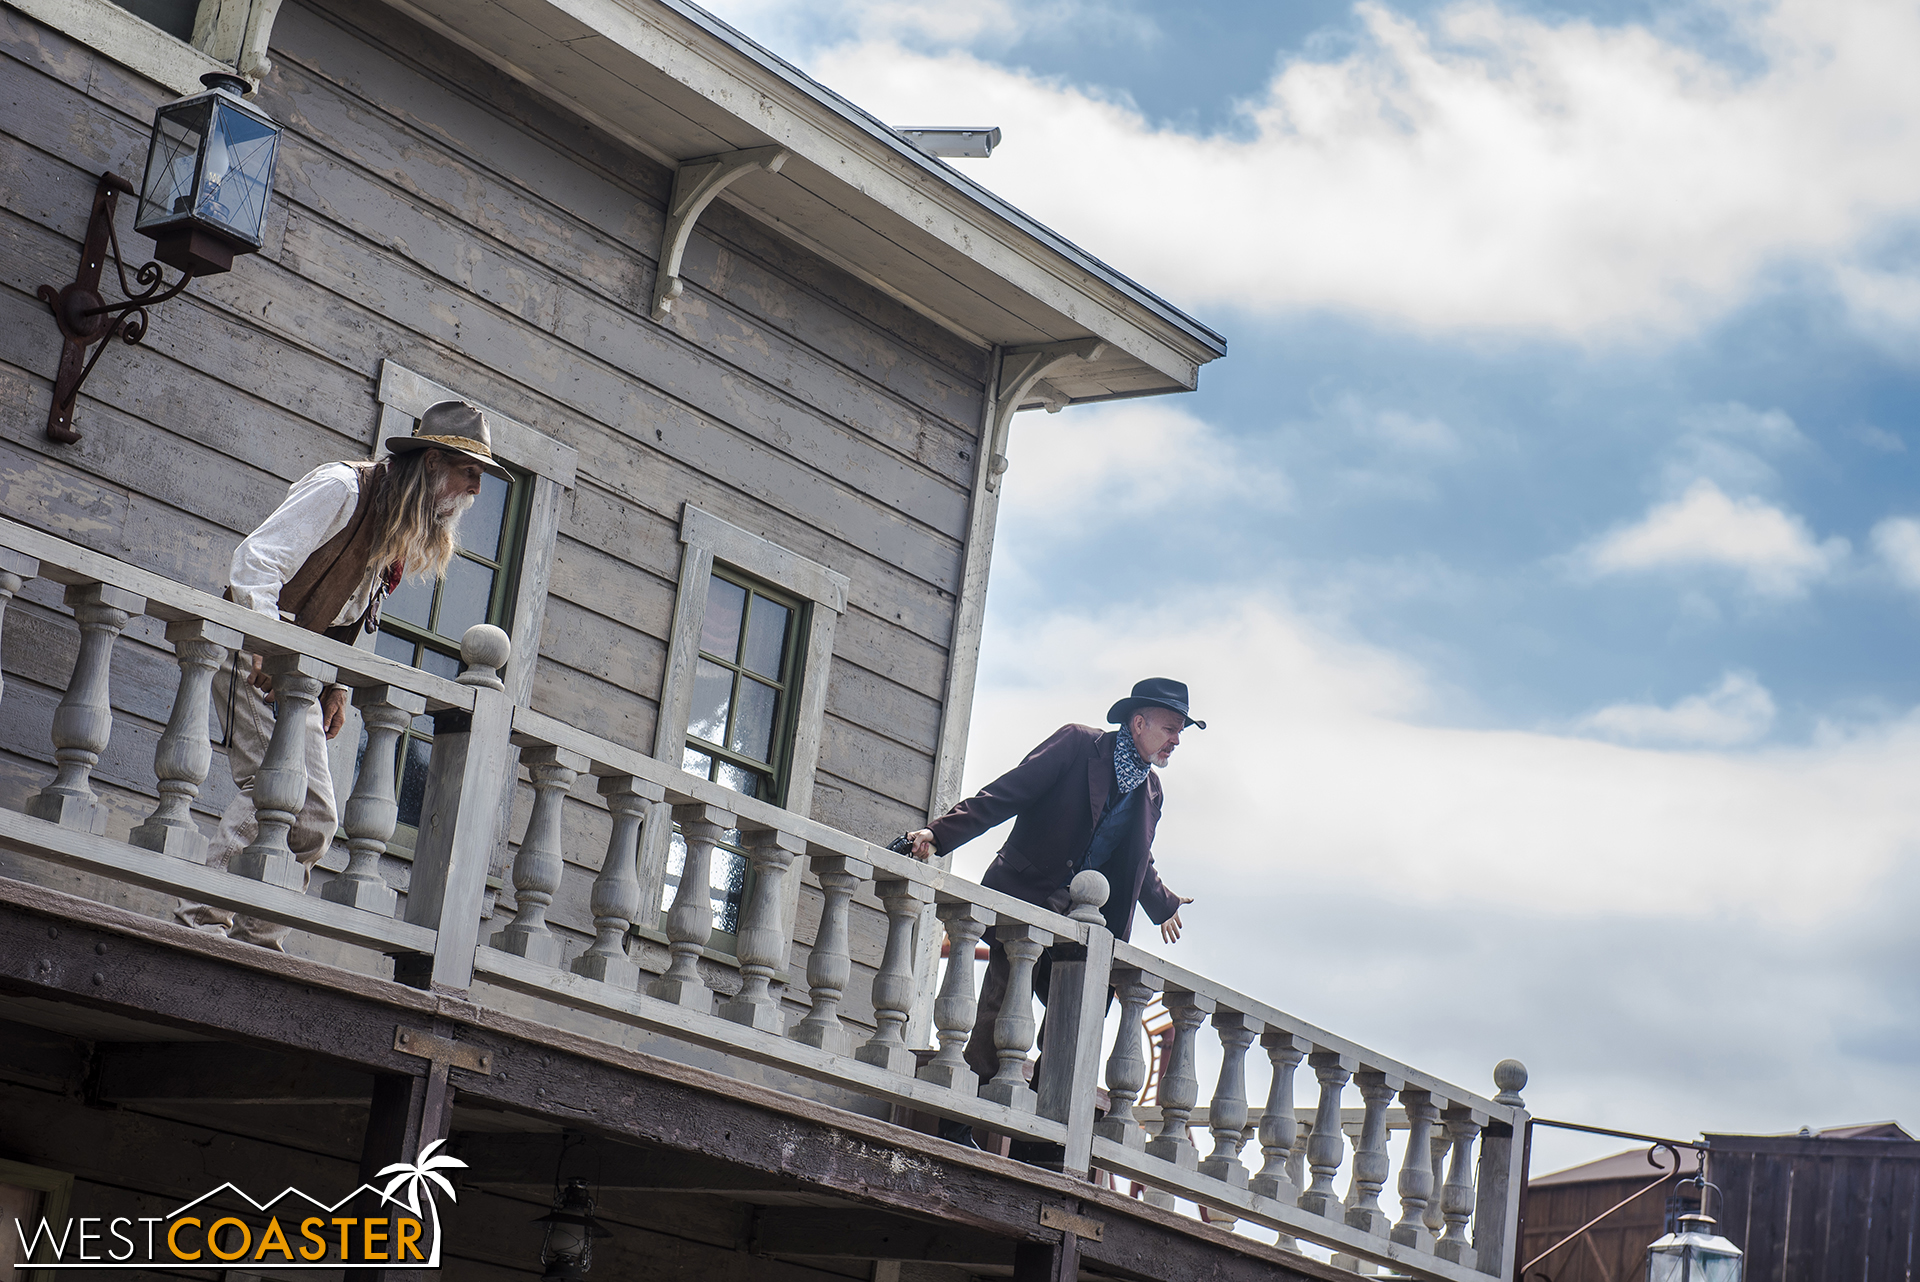  When the posse arrives at the Calico Saloon, they find the entire Mayfield clan there! 